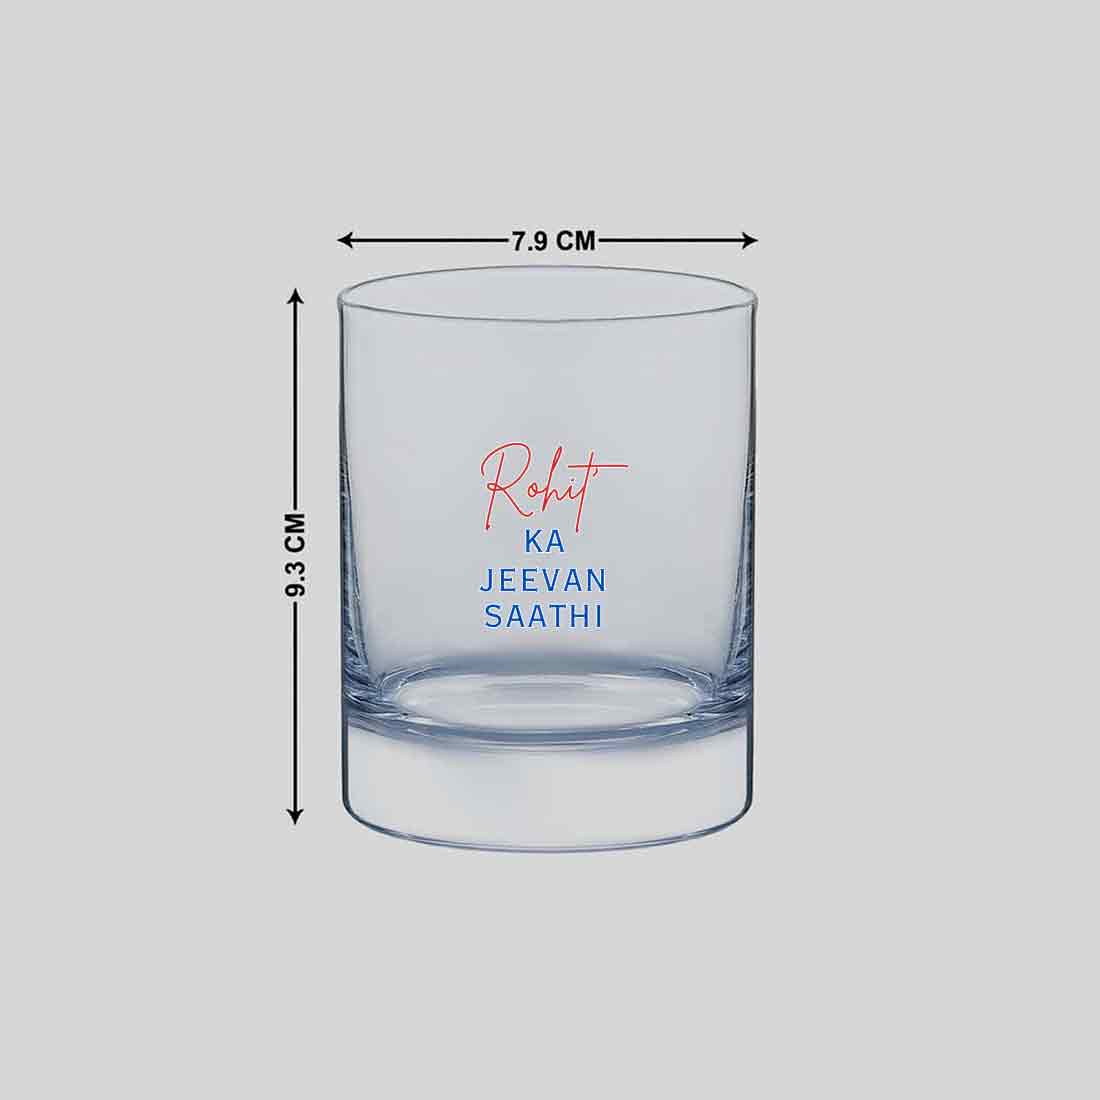 Personalized Glass of Whiskey - Color Printed Glasses for Alcohol